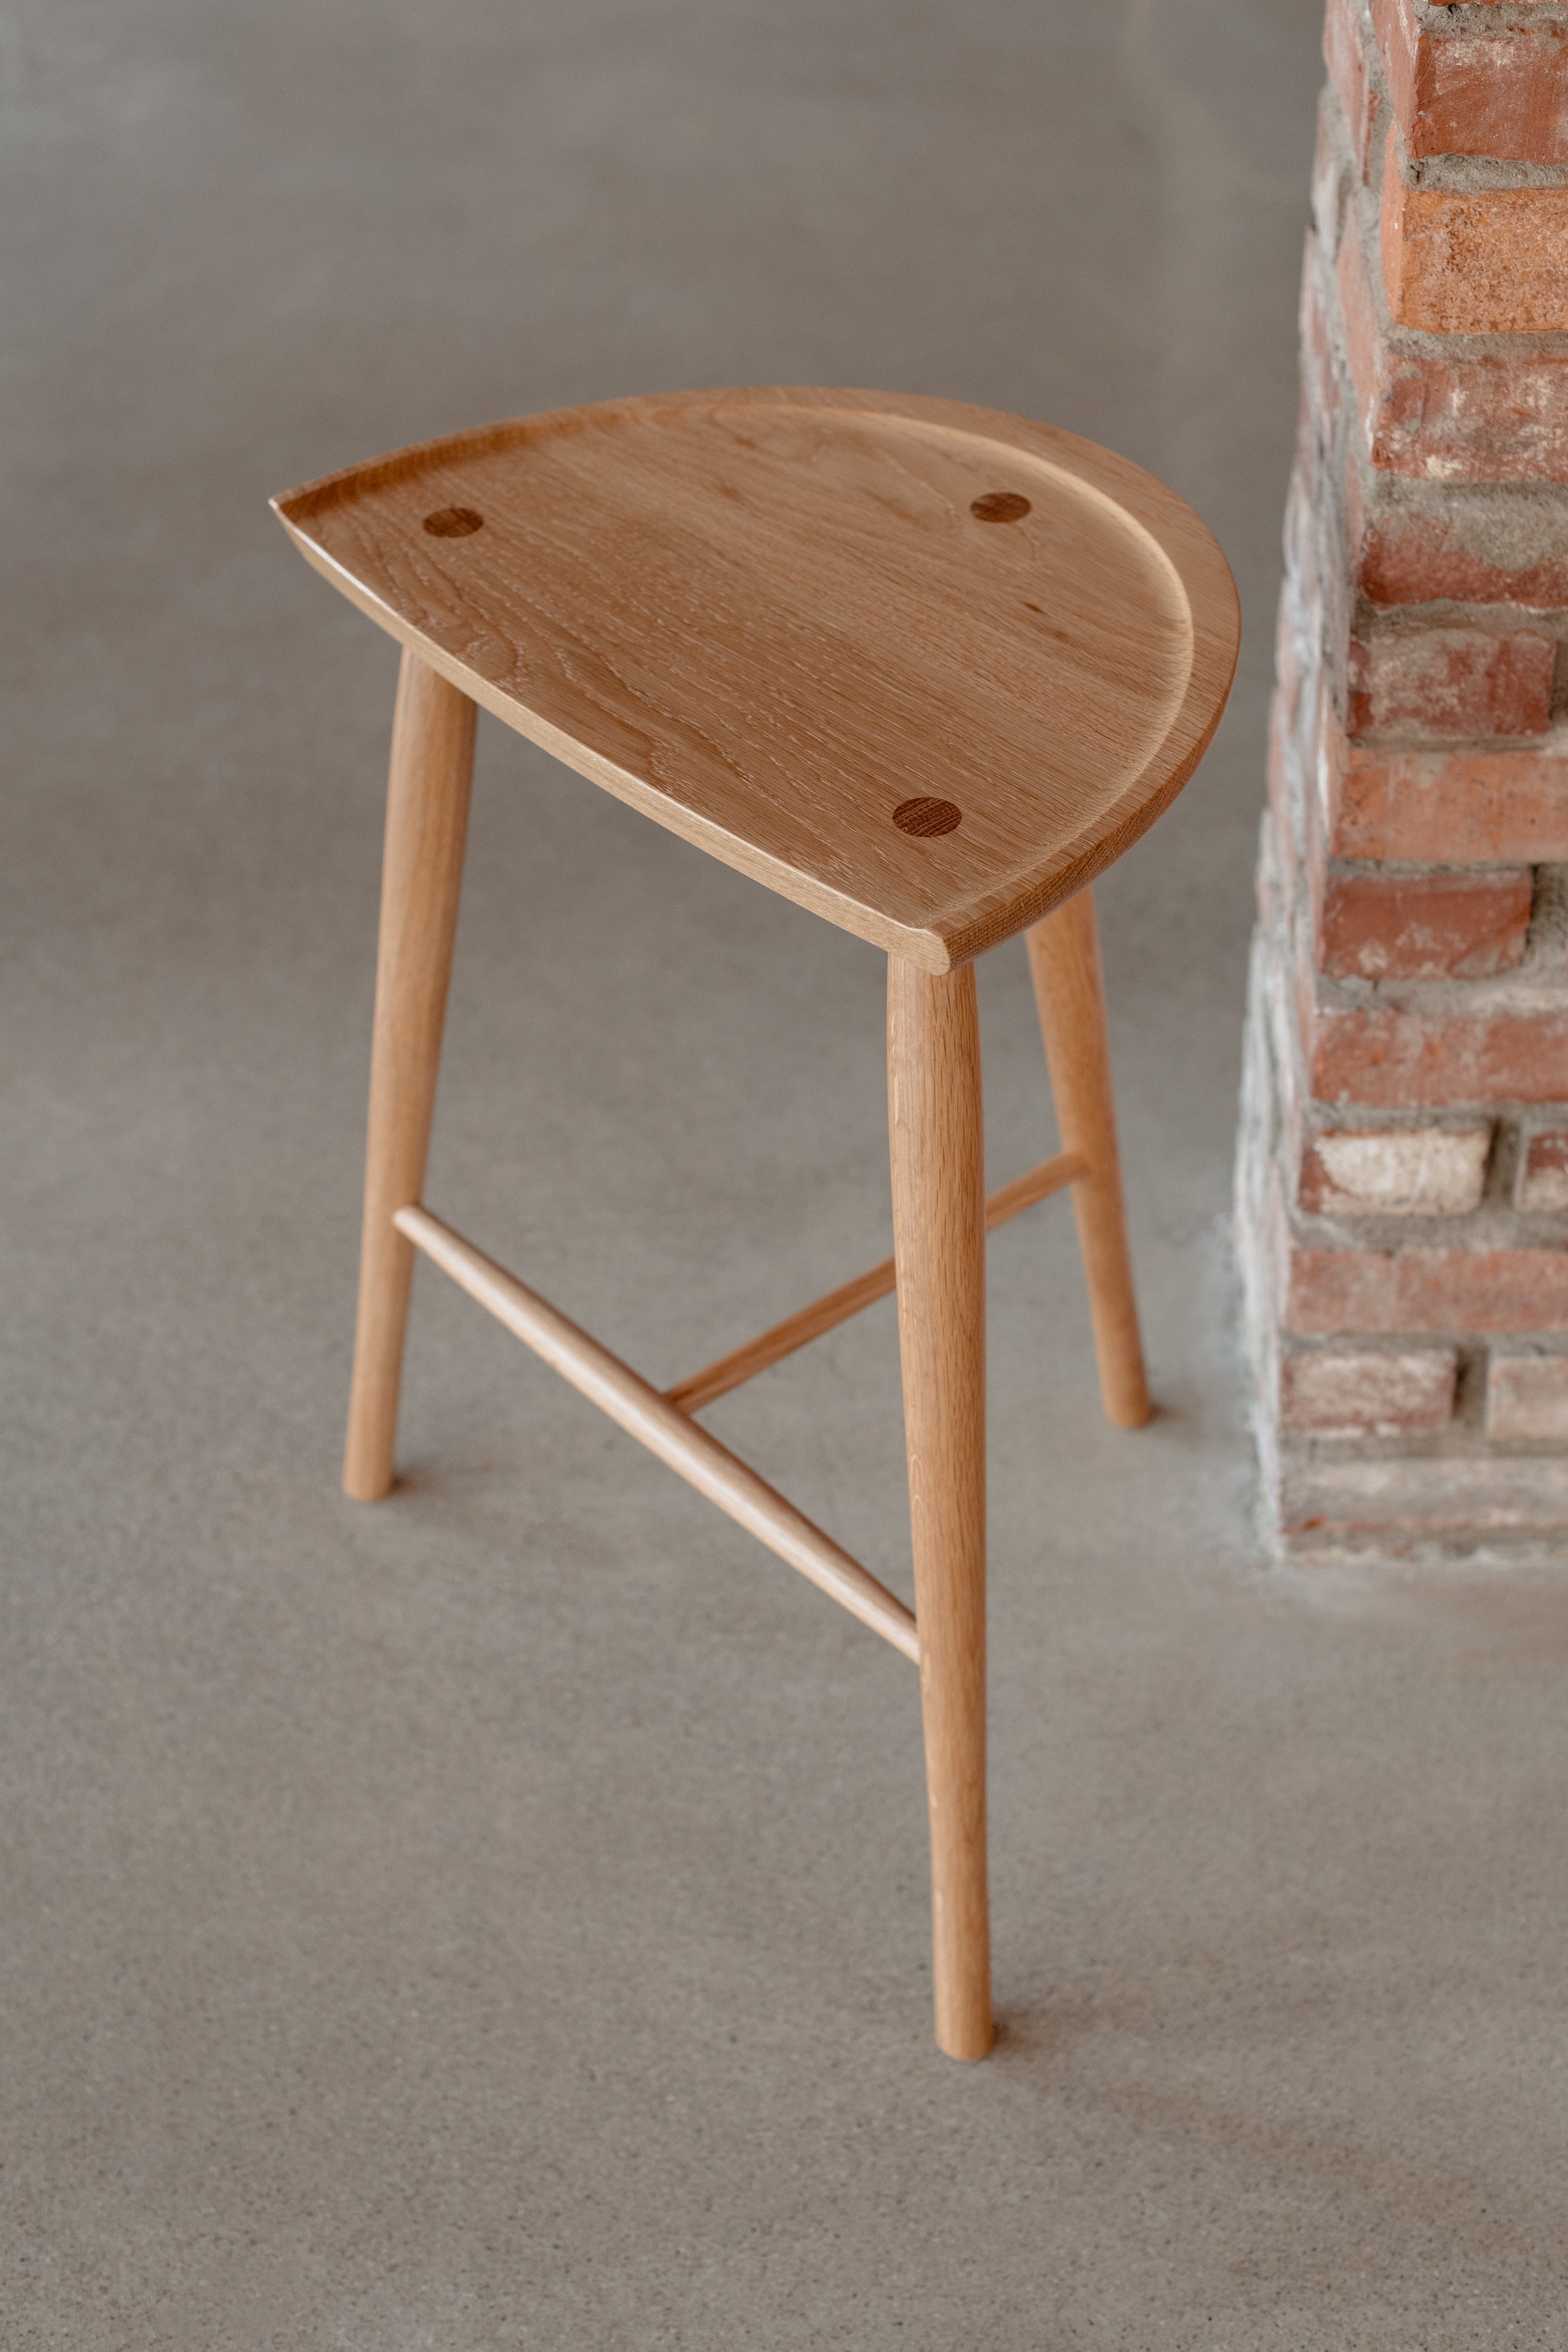 White oak Shaker Stool in industrial brick room from Chilton Furniture in Maine